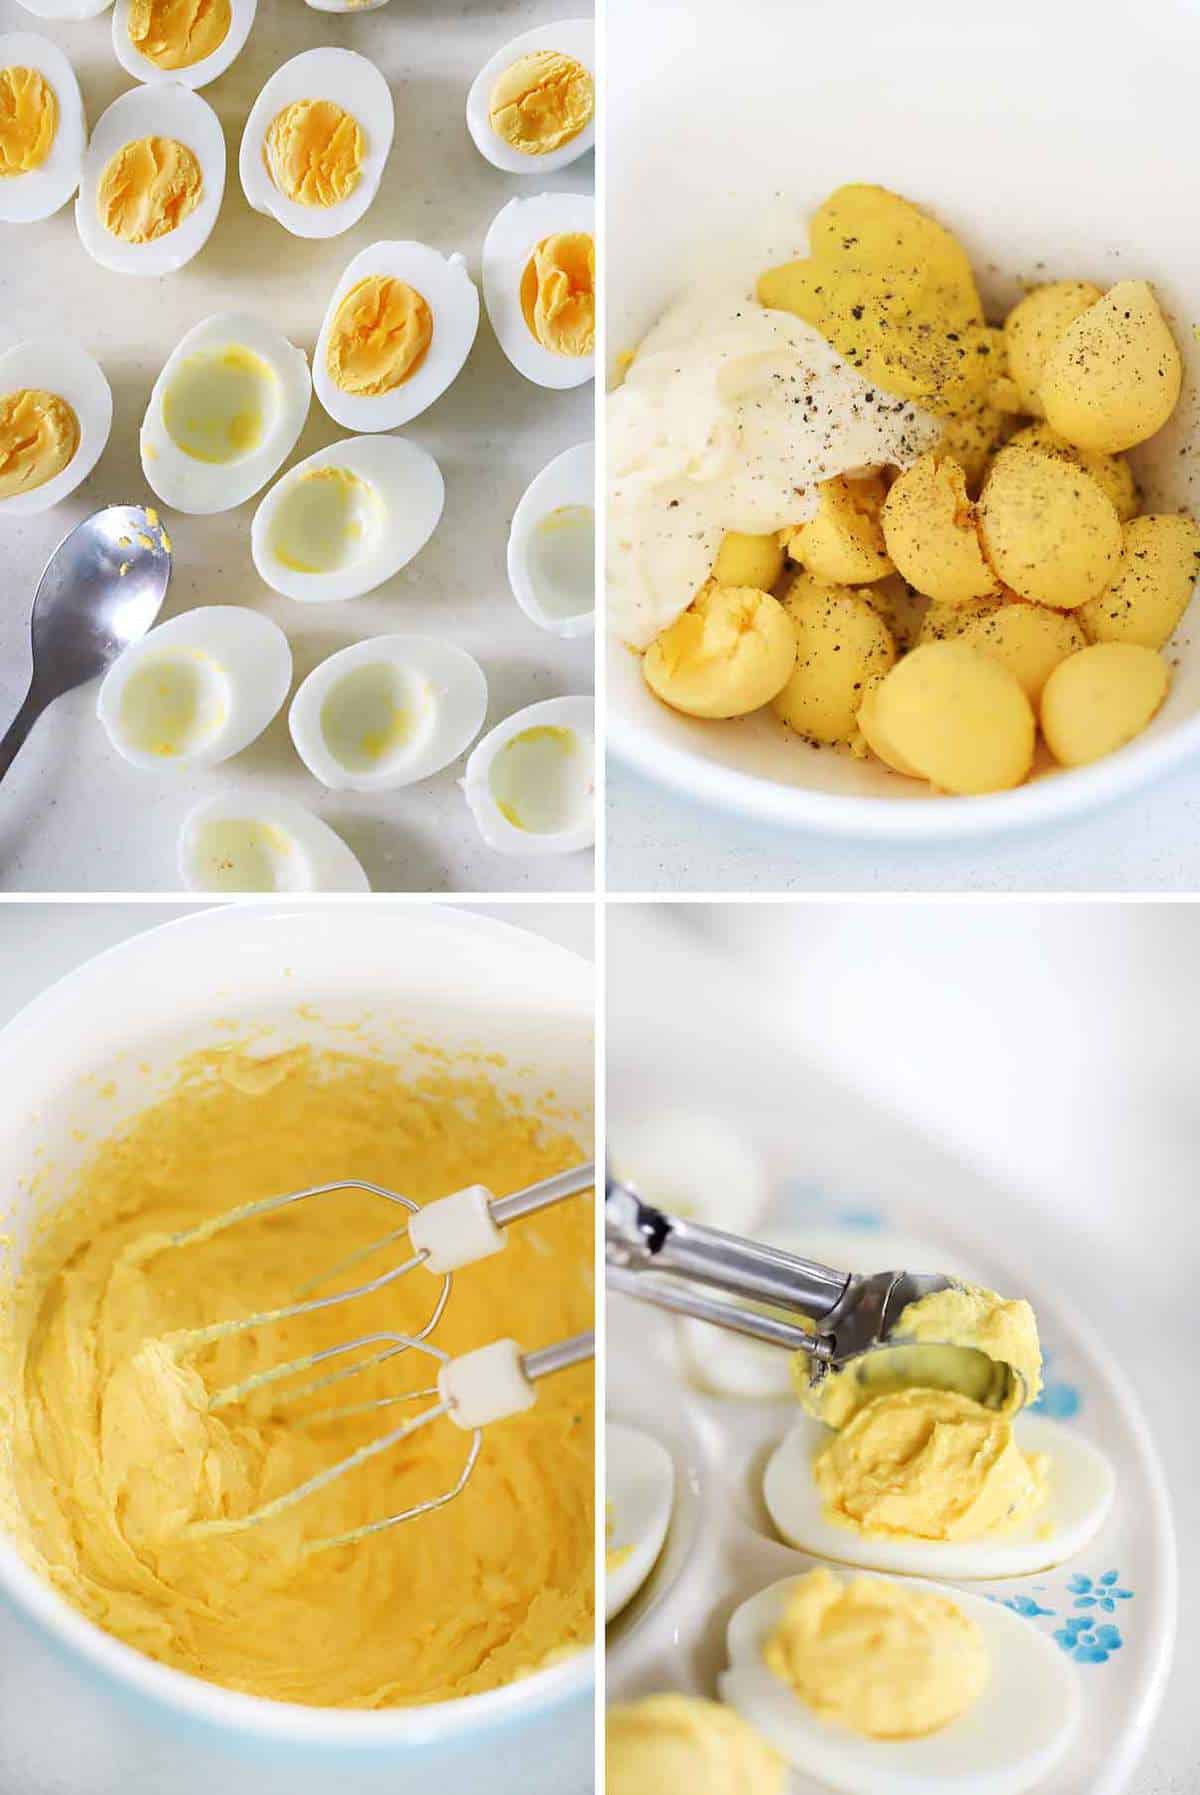 How to make deviled eggs process collage.